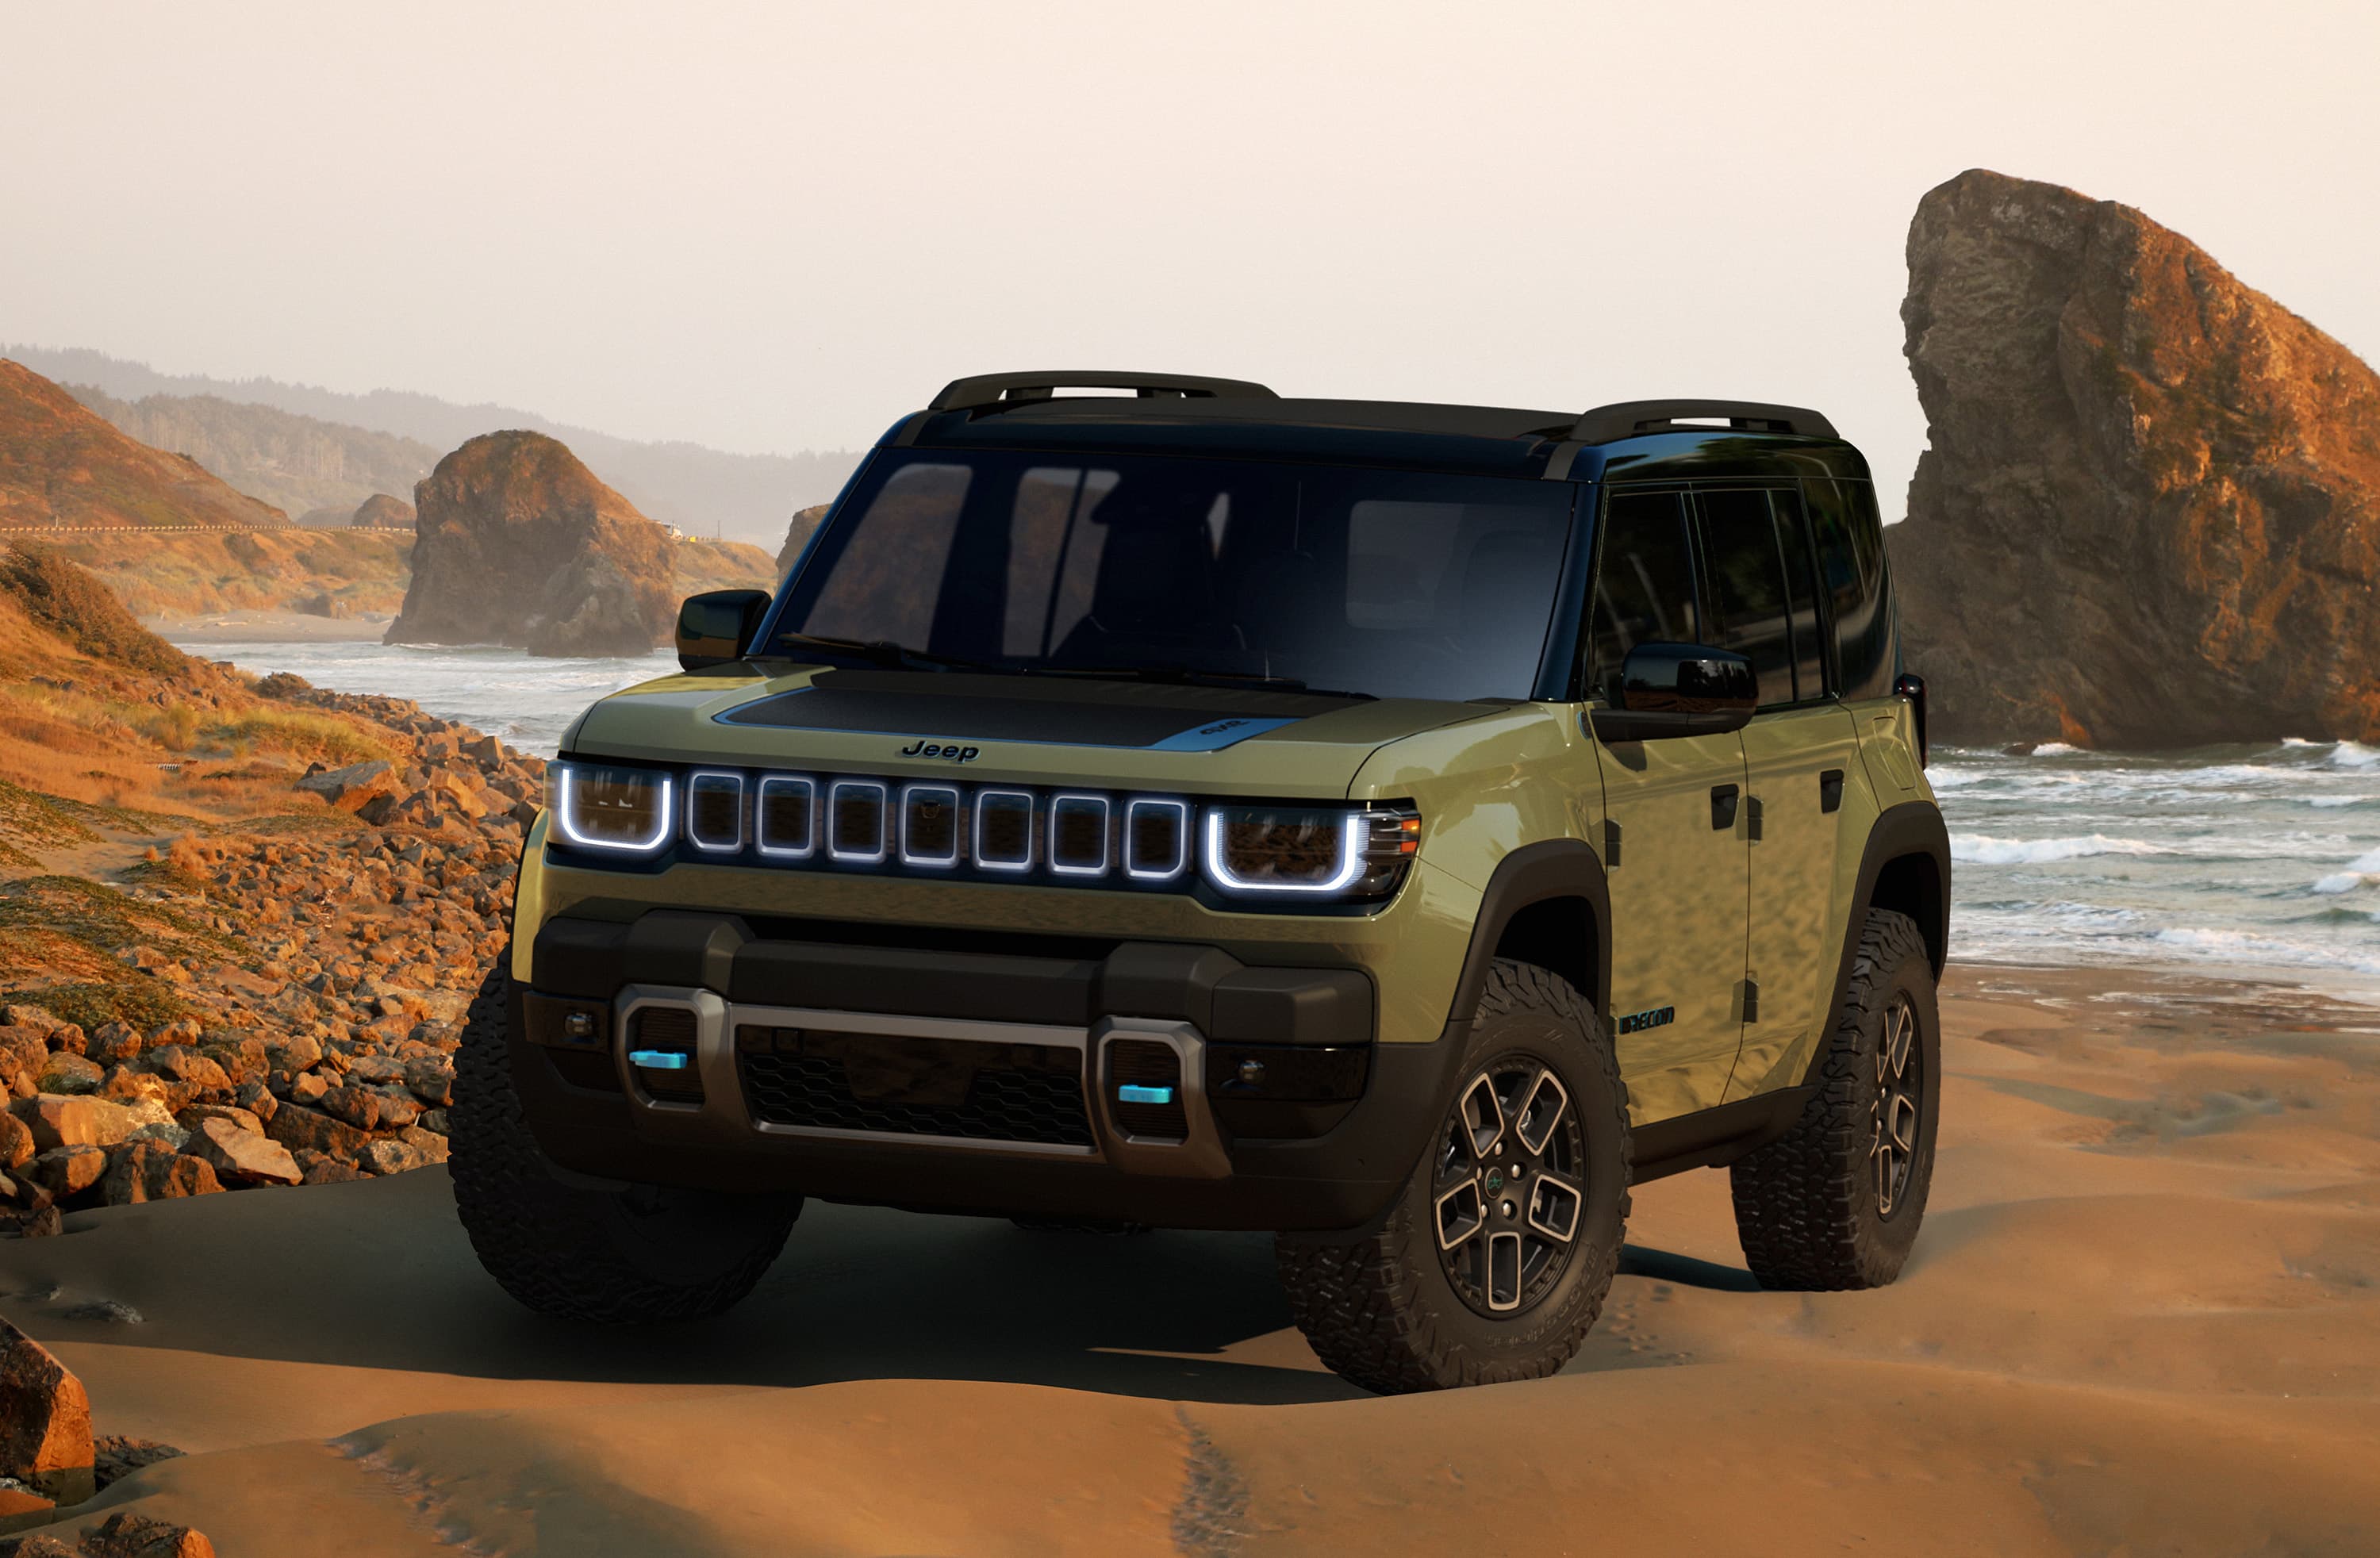 Jeep announces all-electric Wrangler-inspired SUV, new EVs by 2025